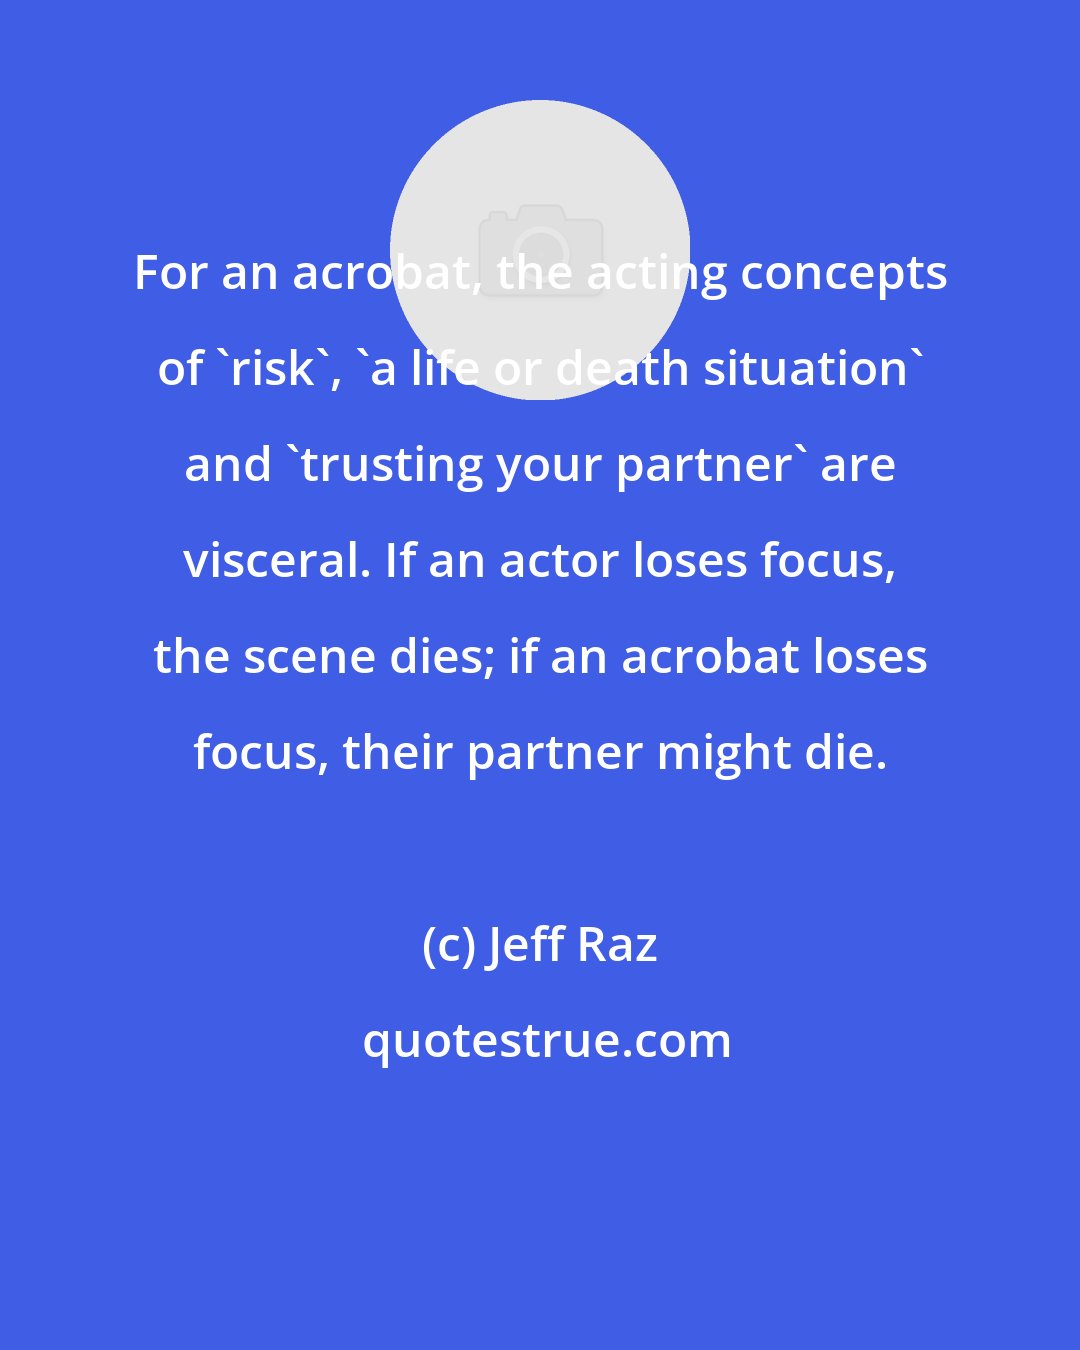 Jeff Raz: For an acrobat, the acting concepts of 'risk', 'a life or death situation' and 'trusting your partner' are visceral. If an actor loses focus, the scene dies; if an acrobat loses focus, their partner might die.